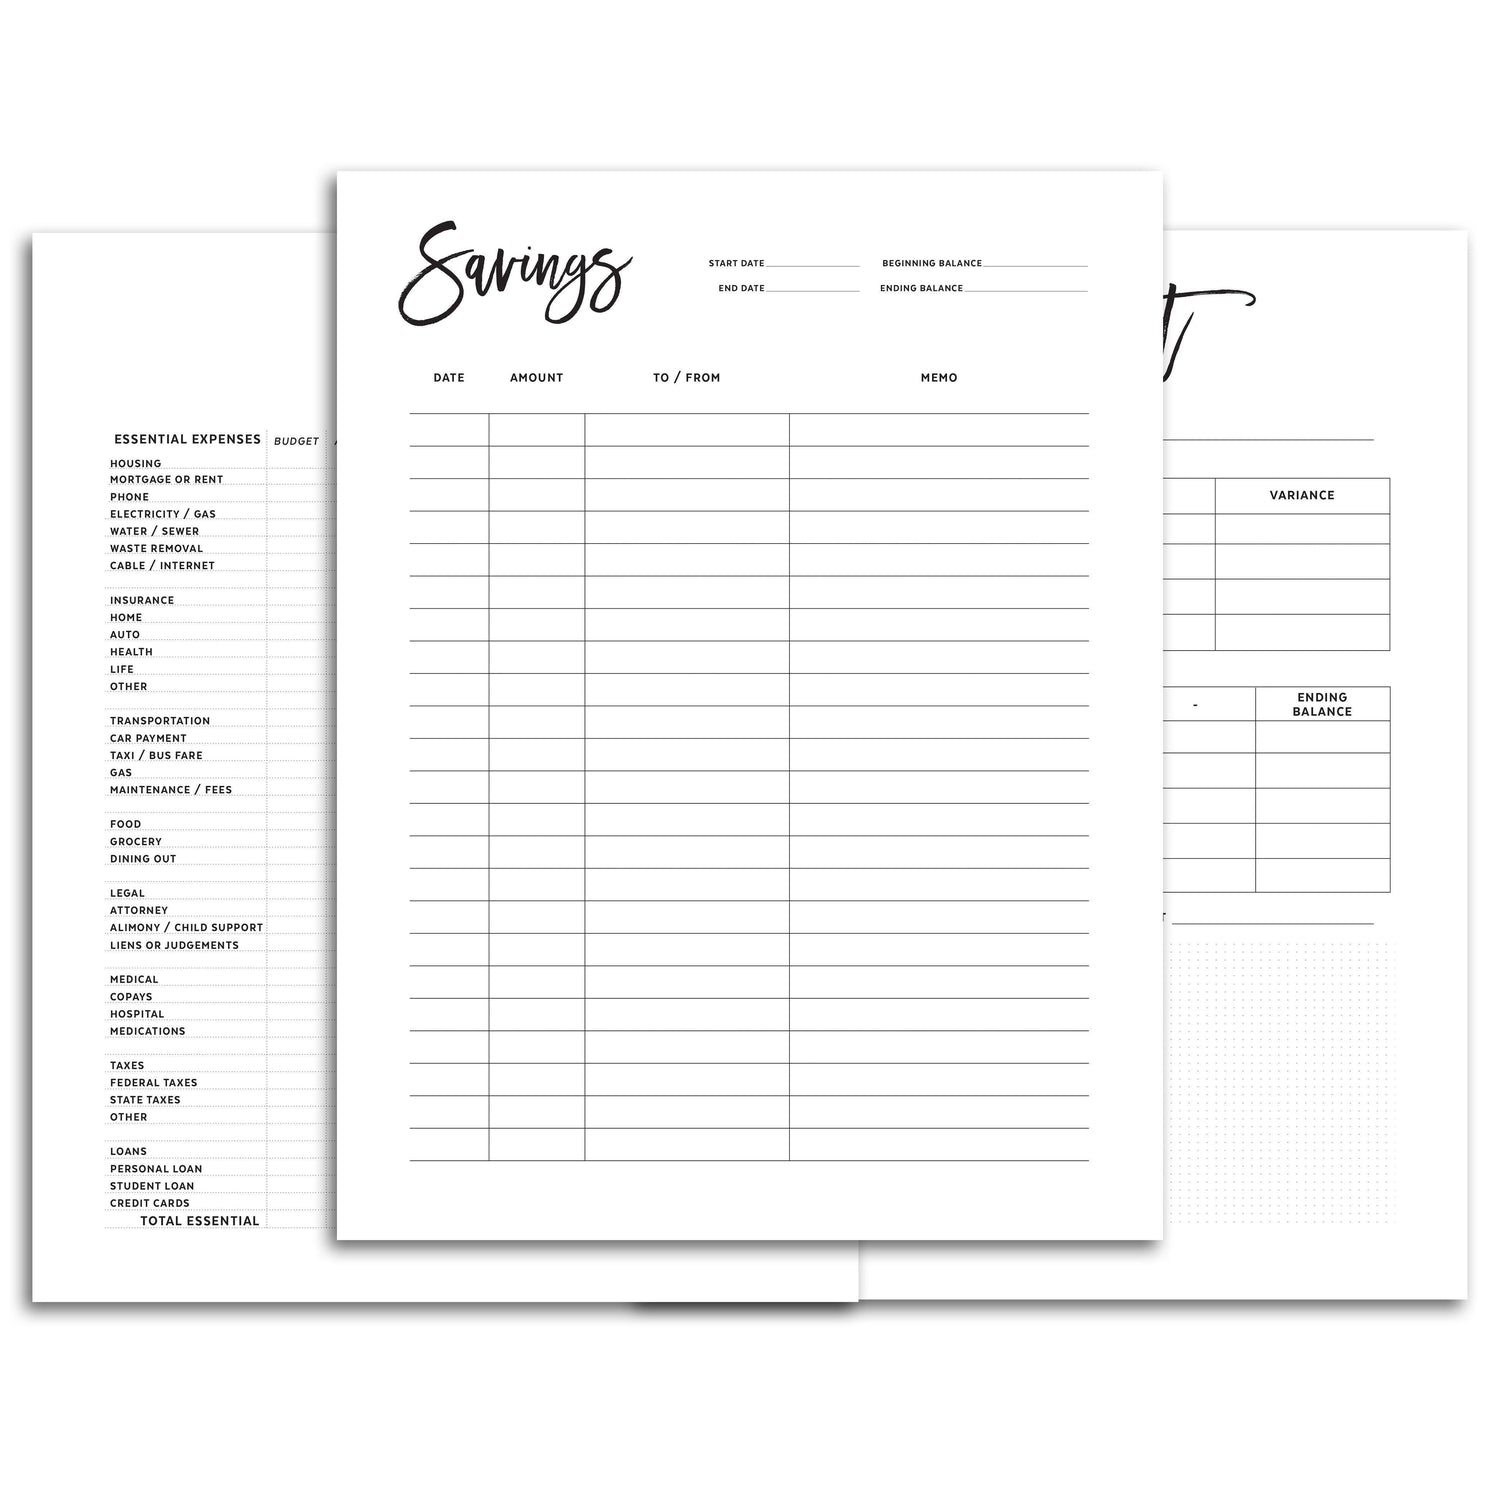 Budget Planner Pages, Printed or Printable